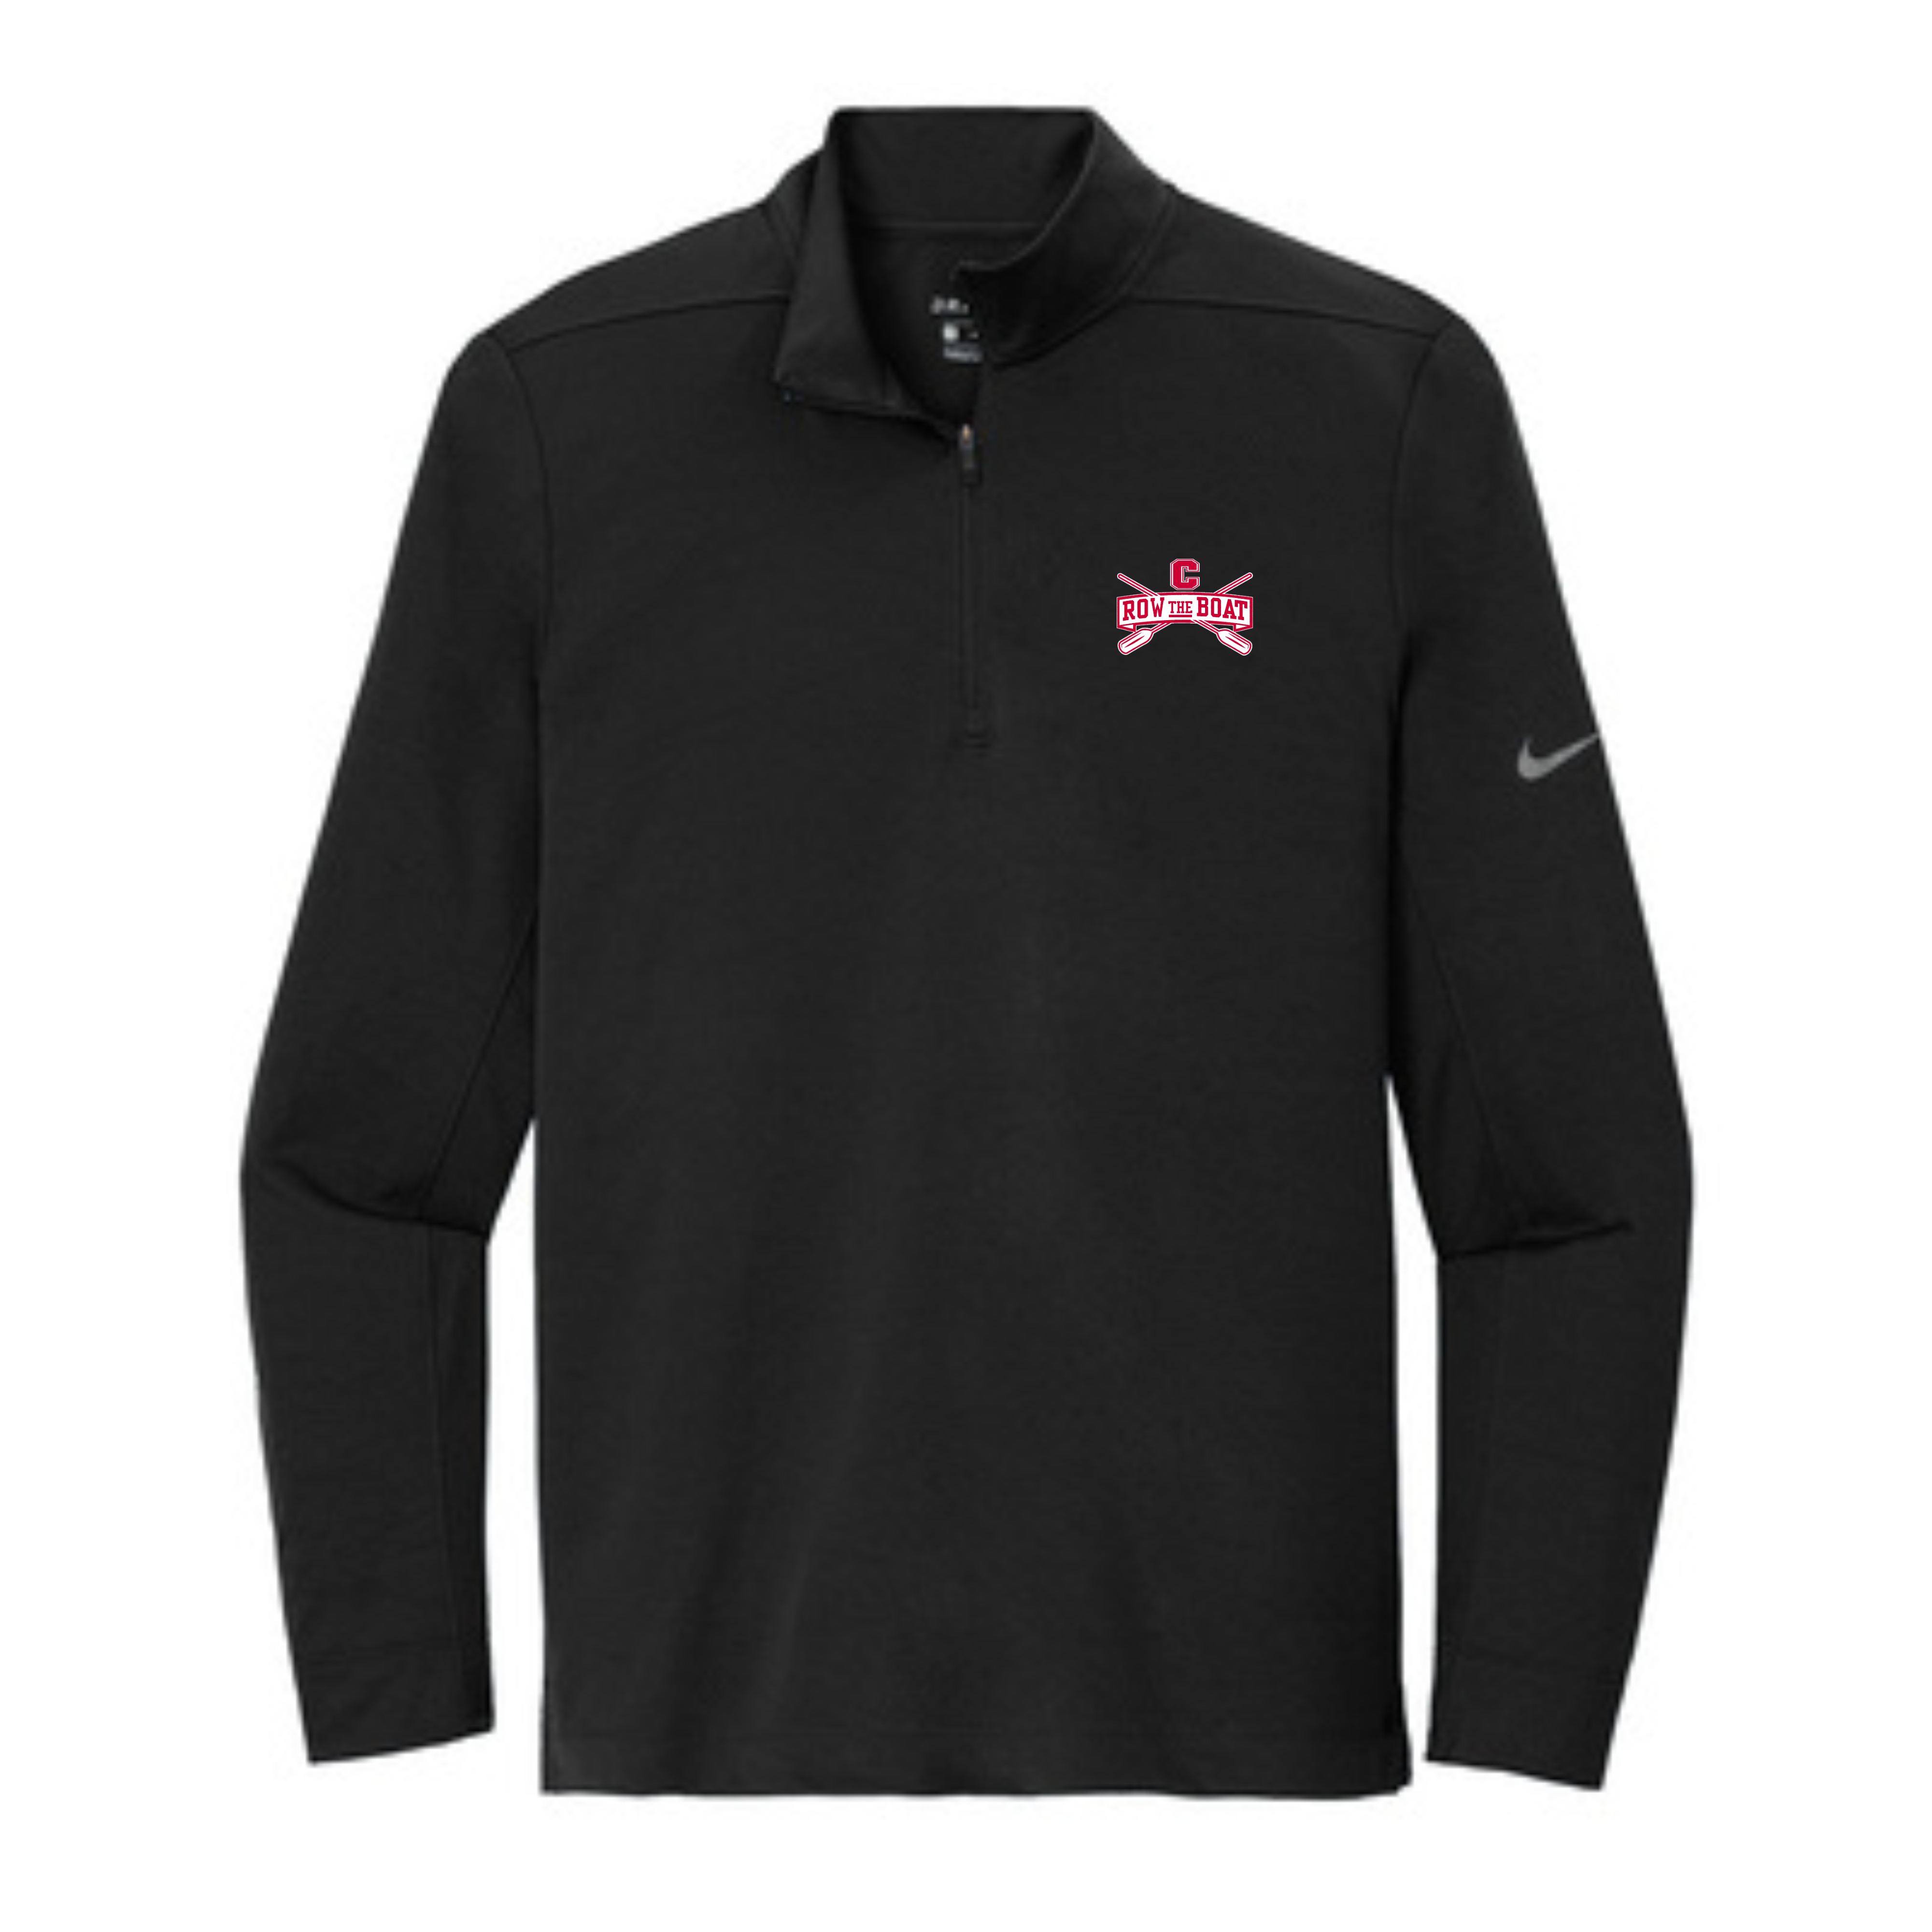 Central Row the Boat Men's Nike Pullover- NKBV6044